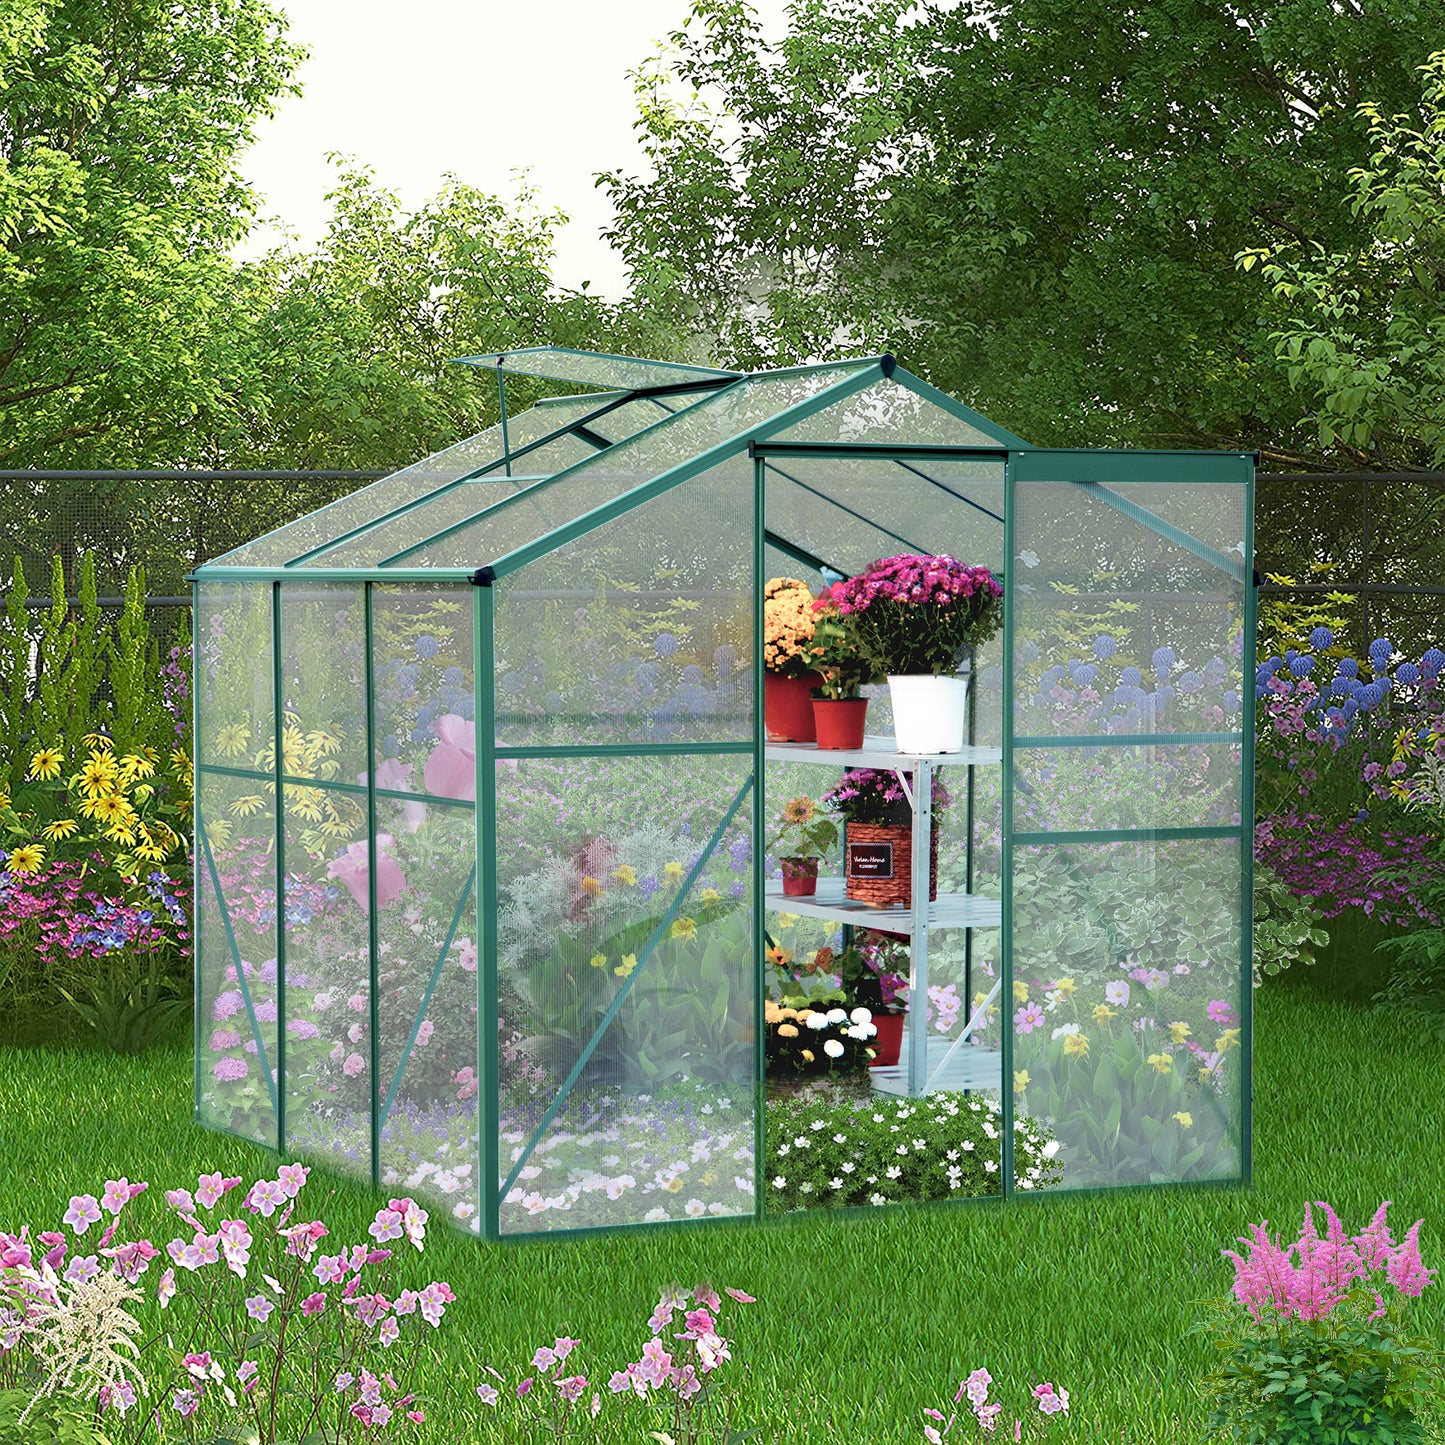 8' x 6' Walk-in Greenhouse for Outdoor, Garden Greenhouse with Metal Frame, Sliding Door, Adjustable Roof Vent and Rain Gutter, Backyard Greenhouse for Plants in Winter, Y004